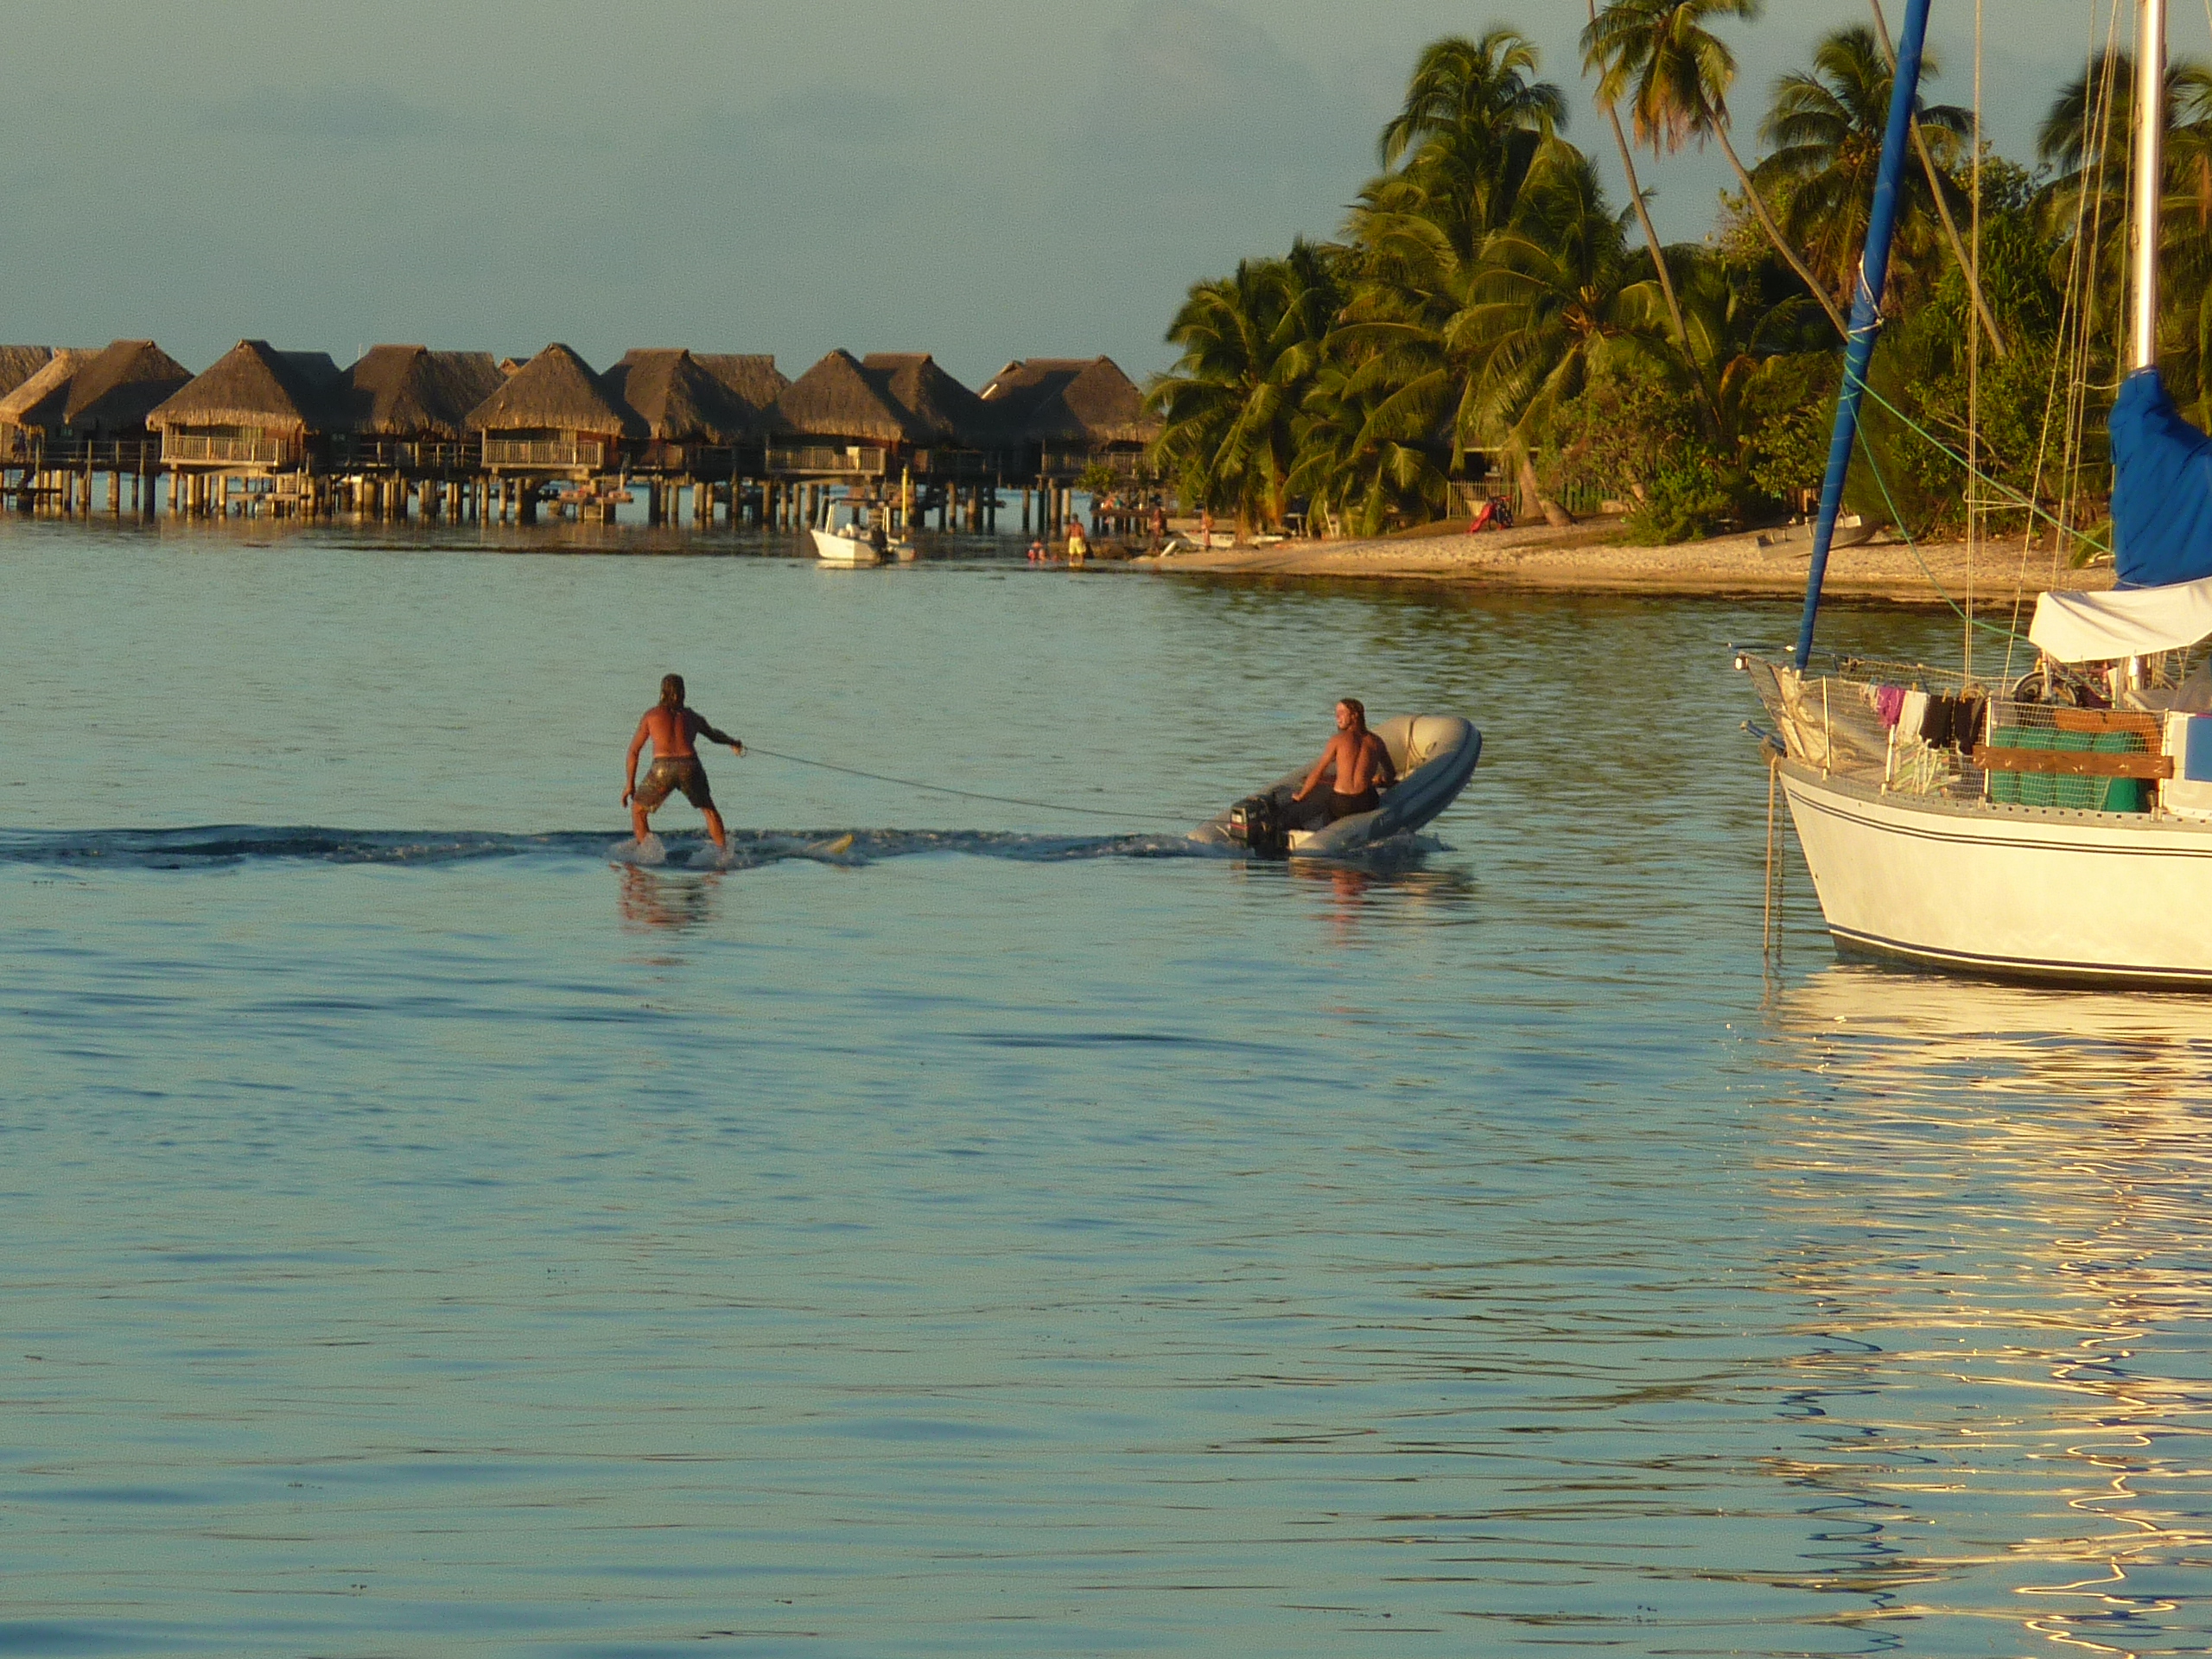 I drive the dinghy with Rob surfing behind. We're at Moorea, the stilt hotel in the background.